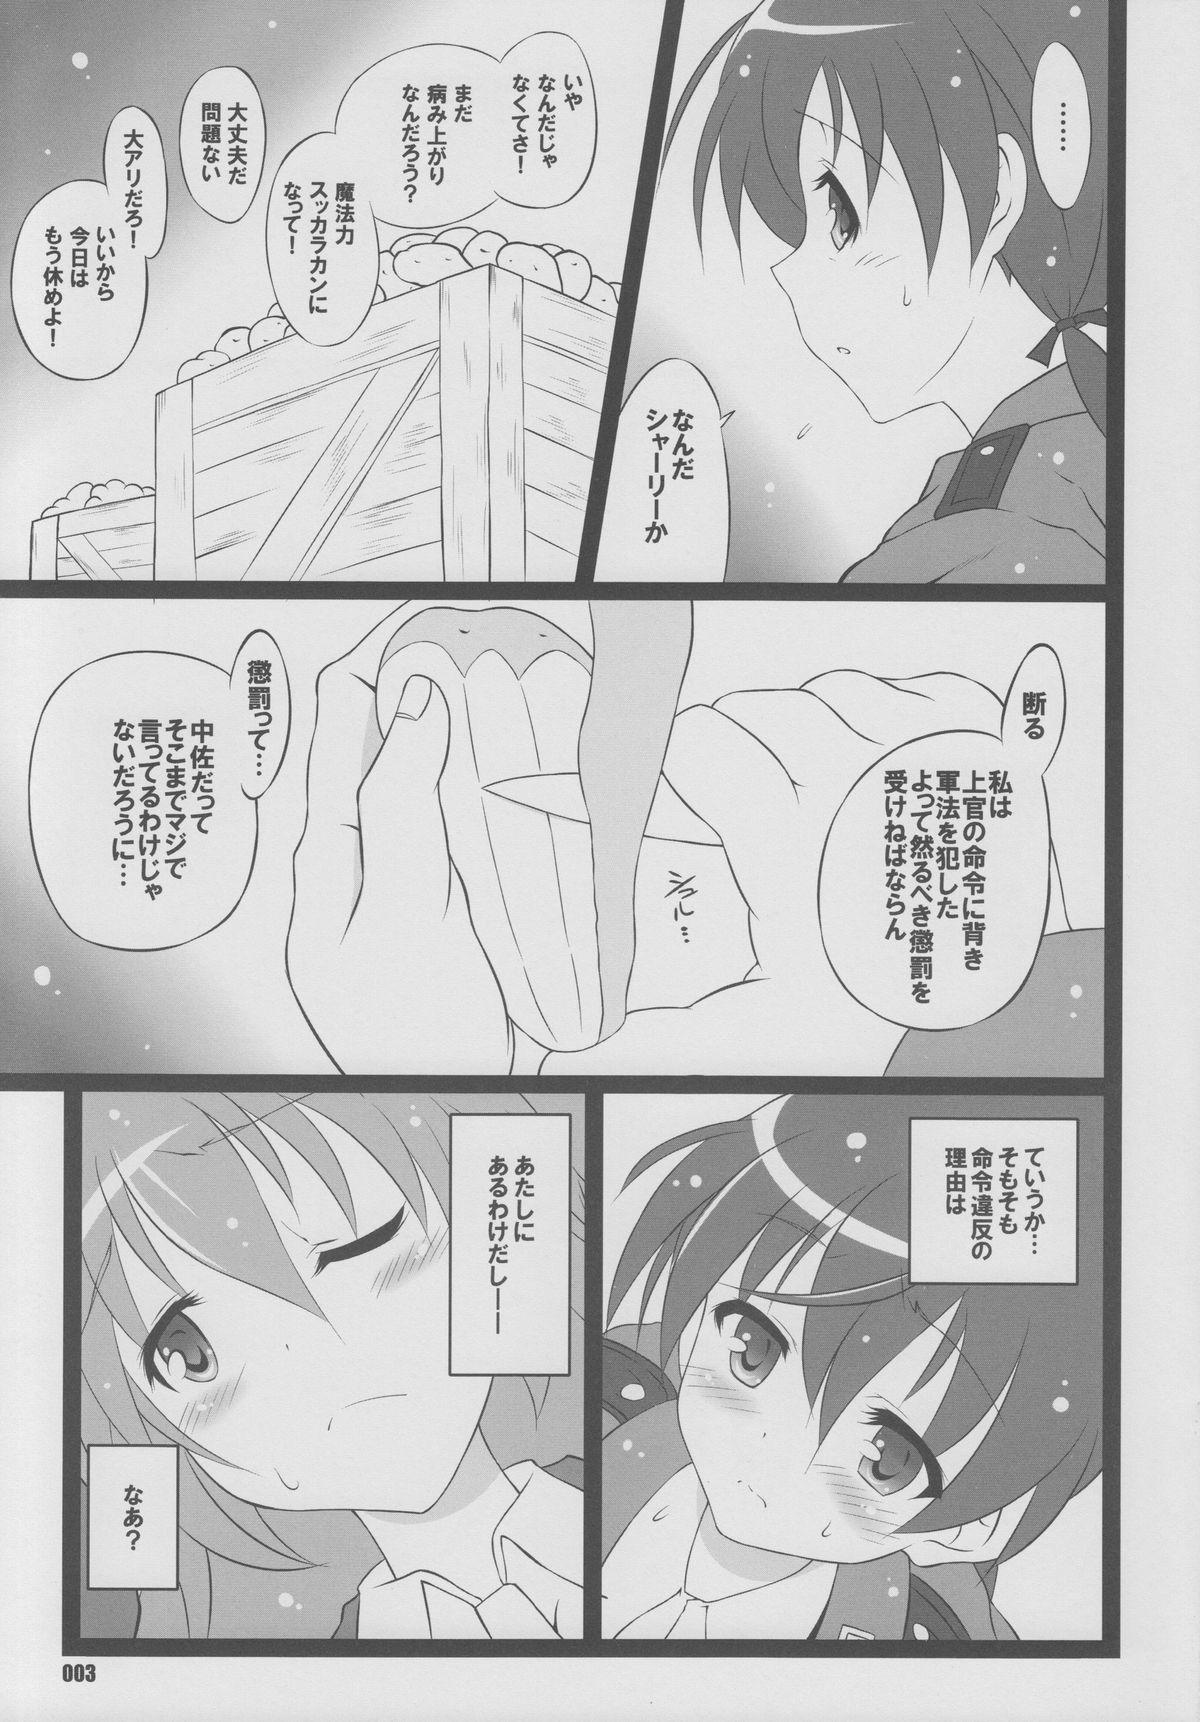 Orgasmus S x G - Z. - Strike witches Compilation - Page 4